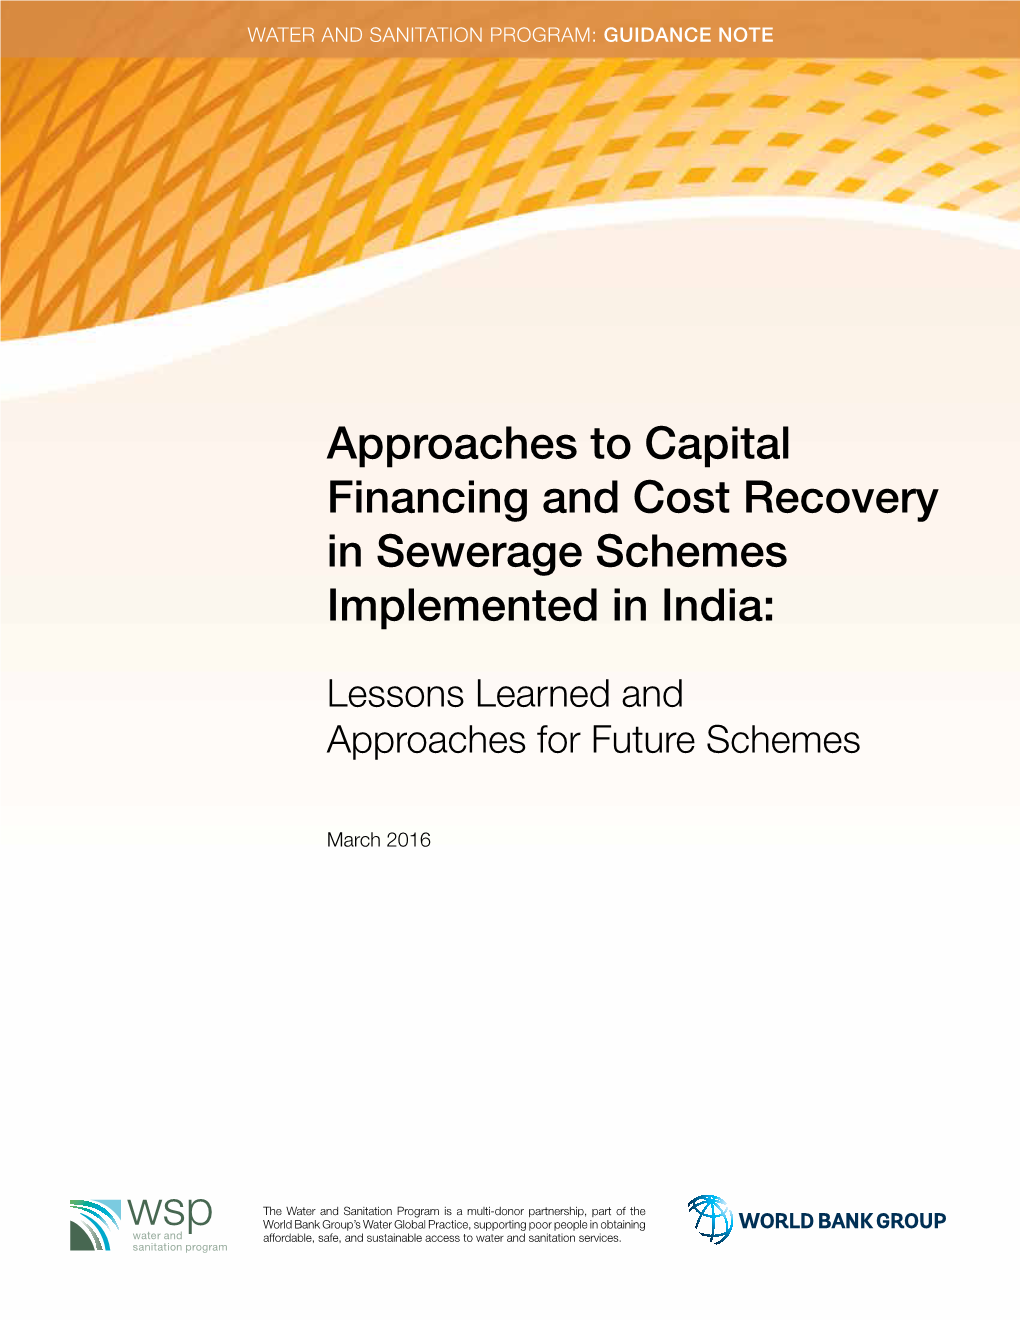 Approaches to Capital Financing and Cost Recovery in Sewerage Schemes Implemented in India